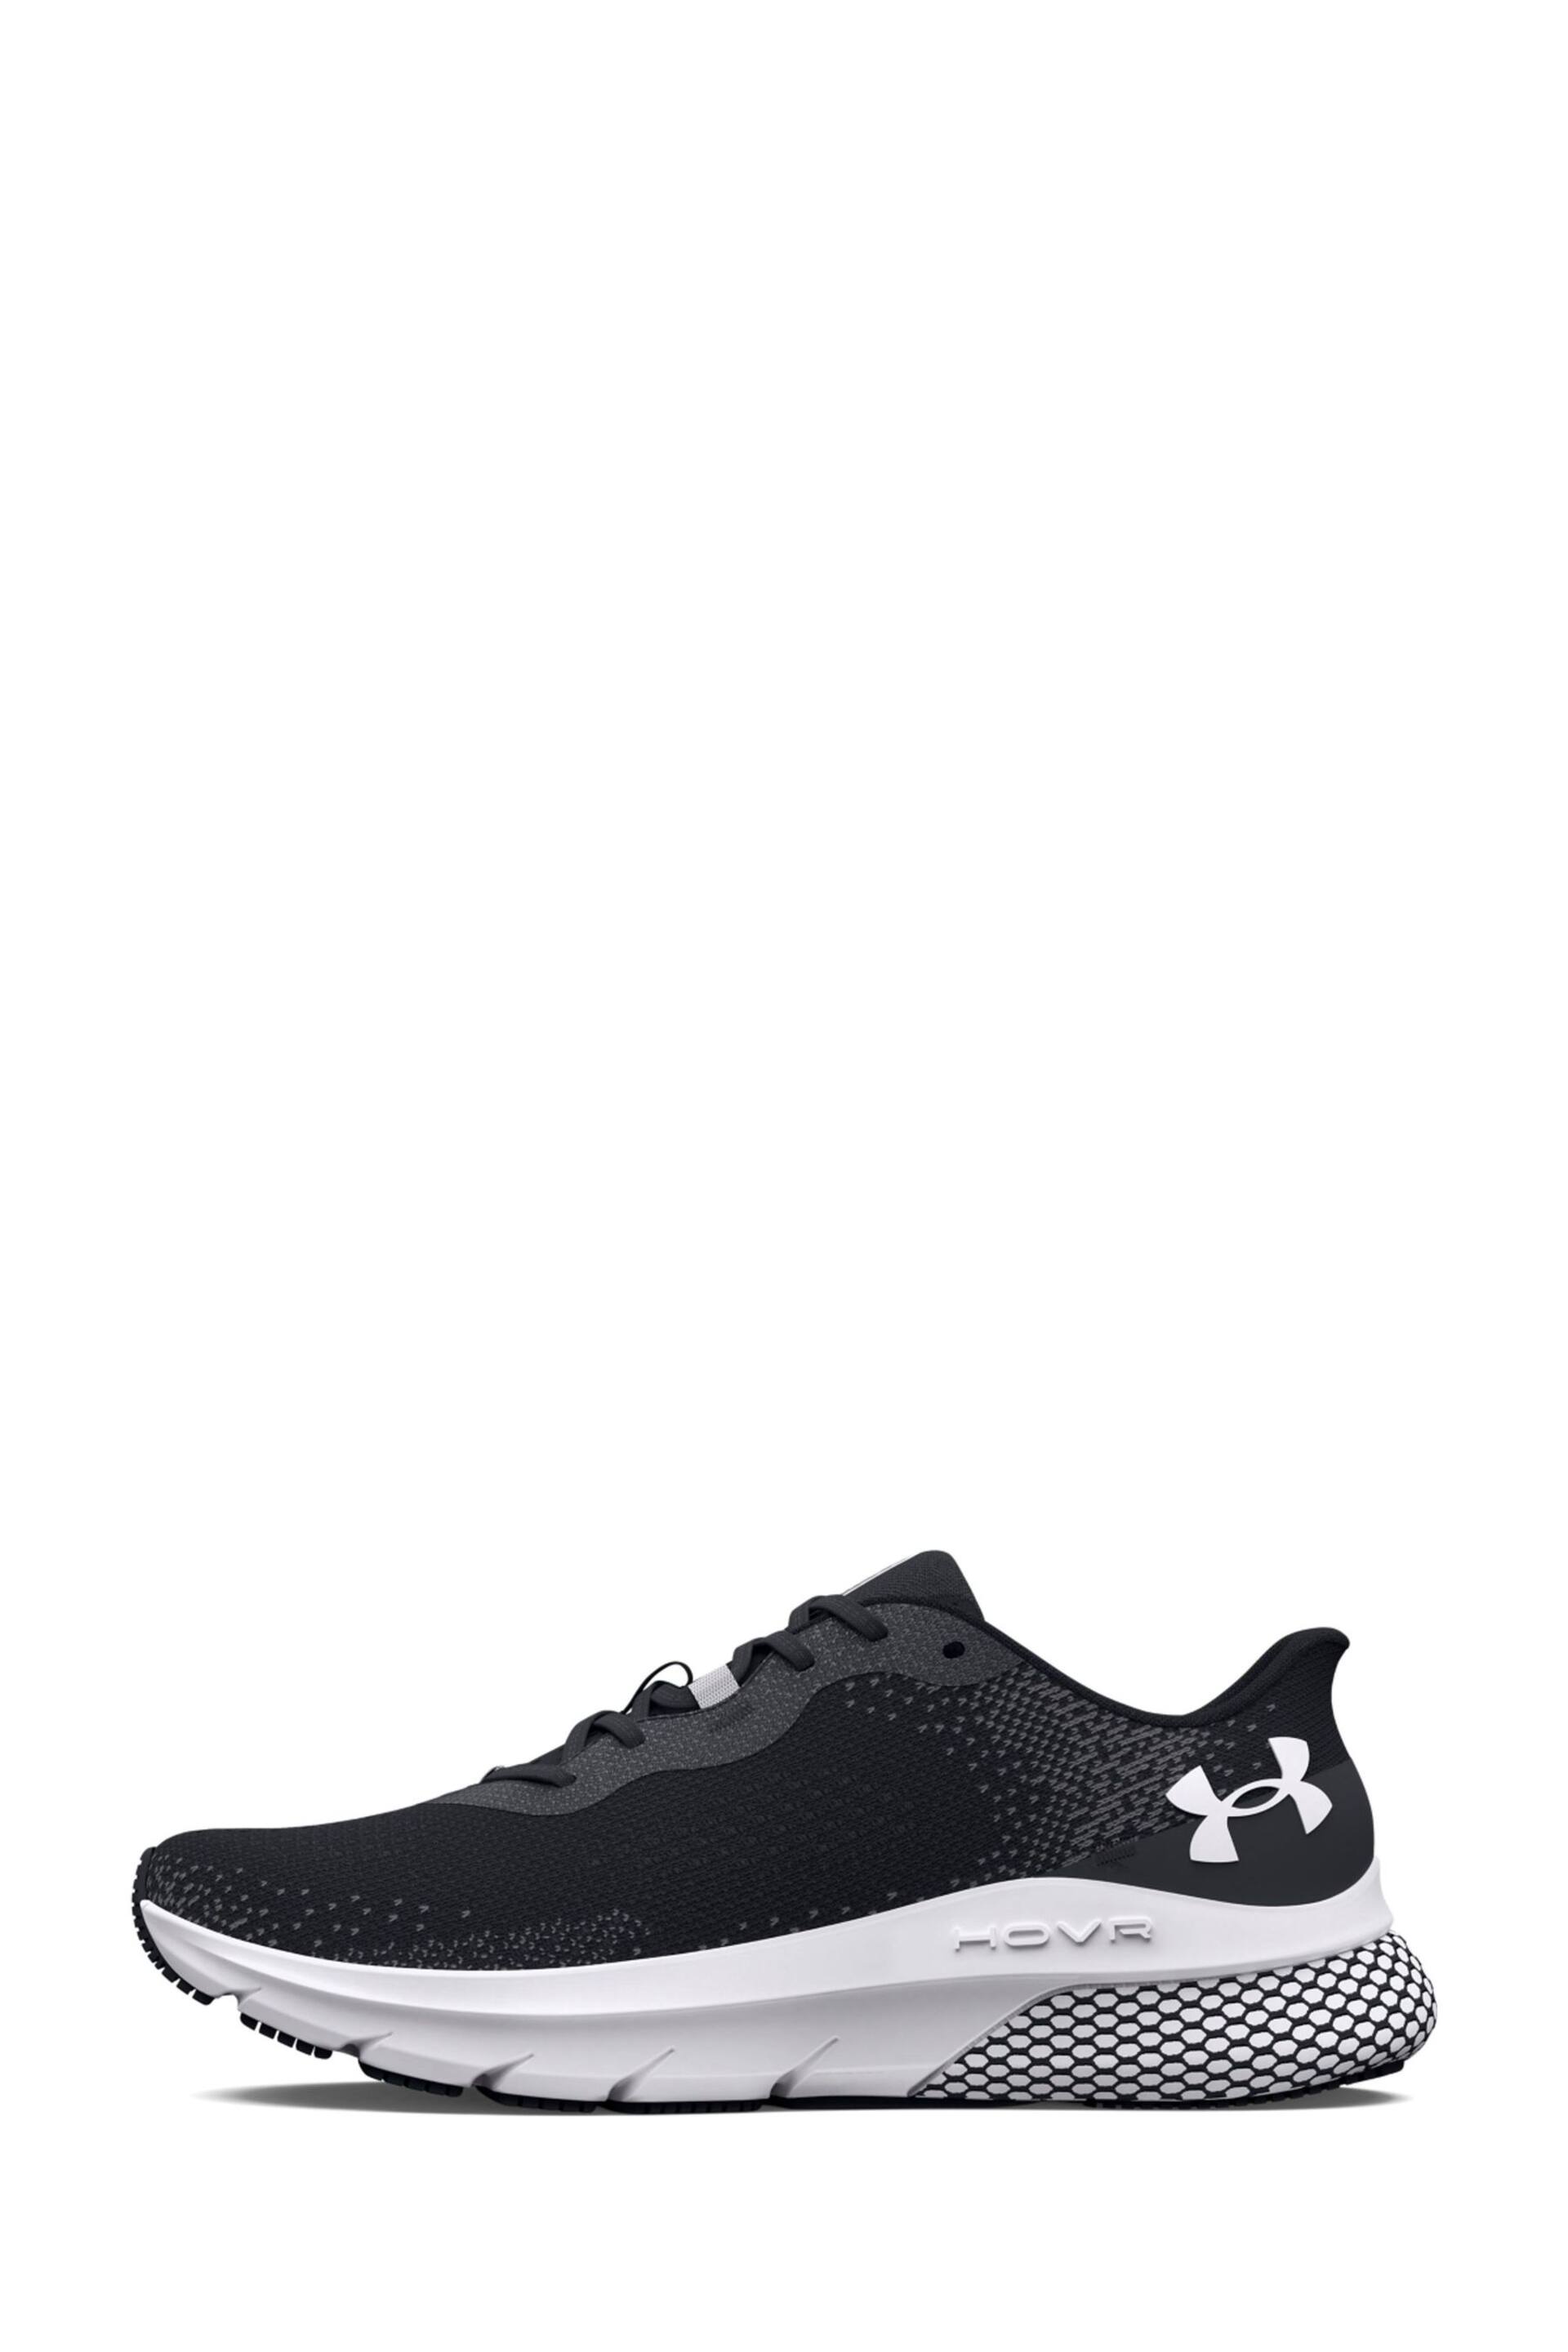 Under Armour Black HOVR Turbulence 2 Trainers - Image 2 of 5